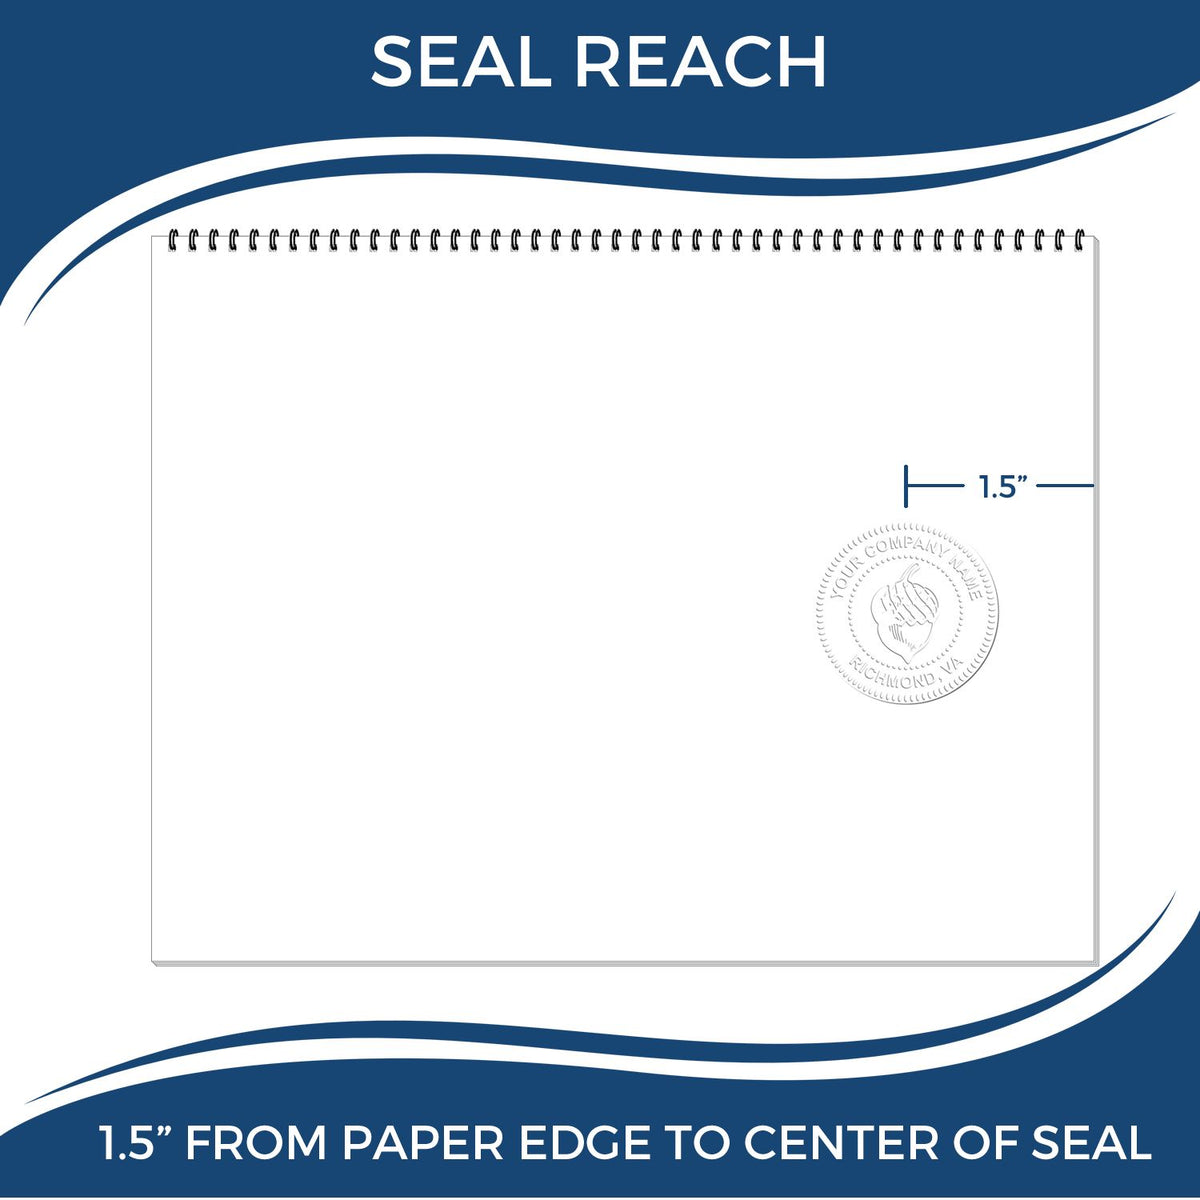 An infographic showing the seal reach which is represented by a ruler and a miniature seal image of the Connecticut Desk Architect Embossing Seal